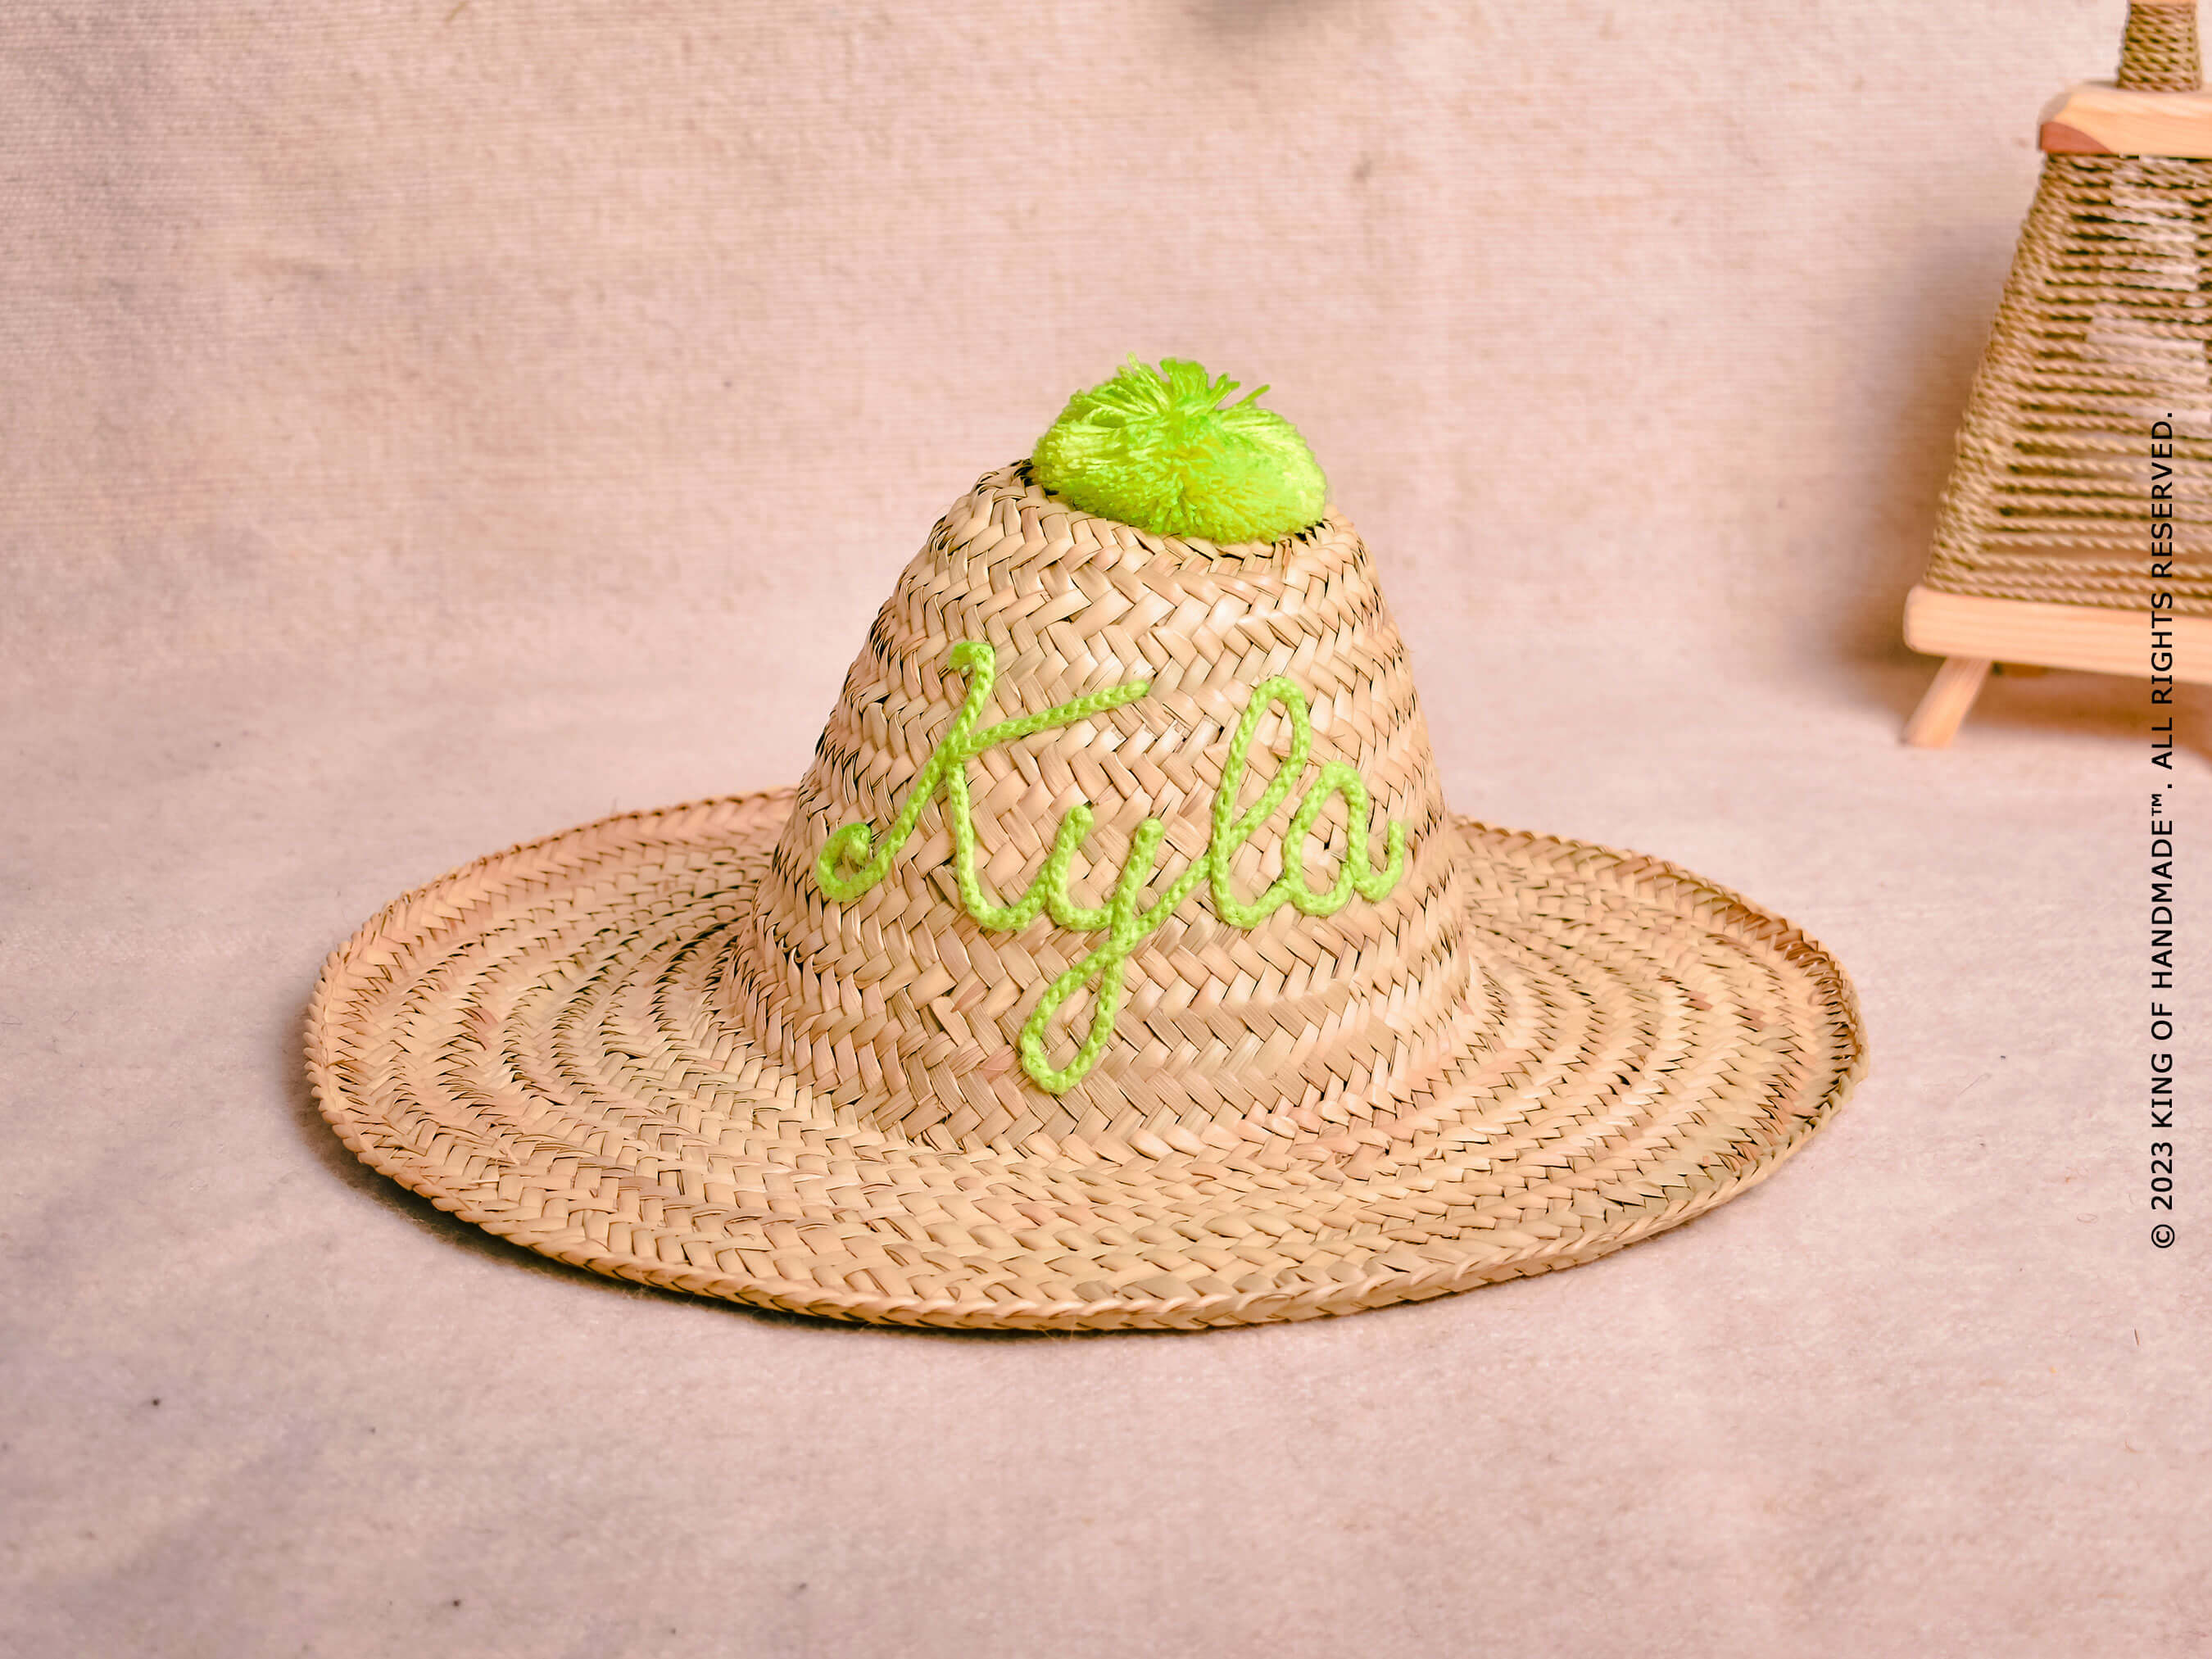 Style, Sun Protection, Memories: Your High-Benefit Personalized Straw Beach Hat!